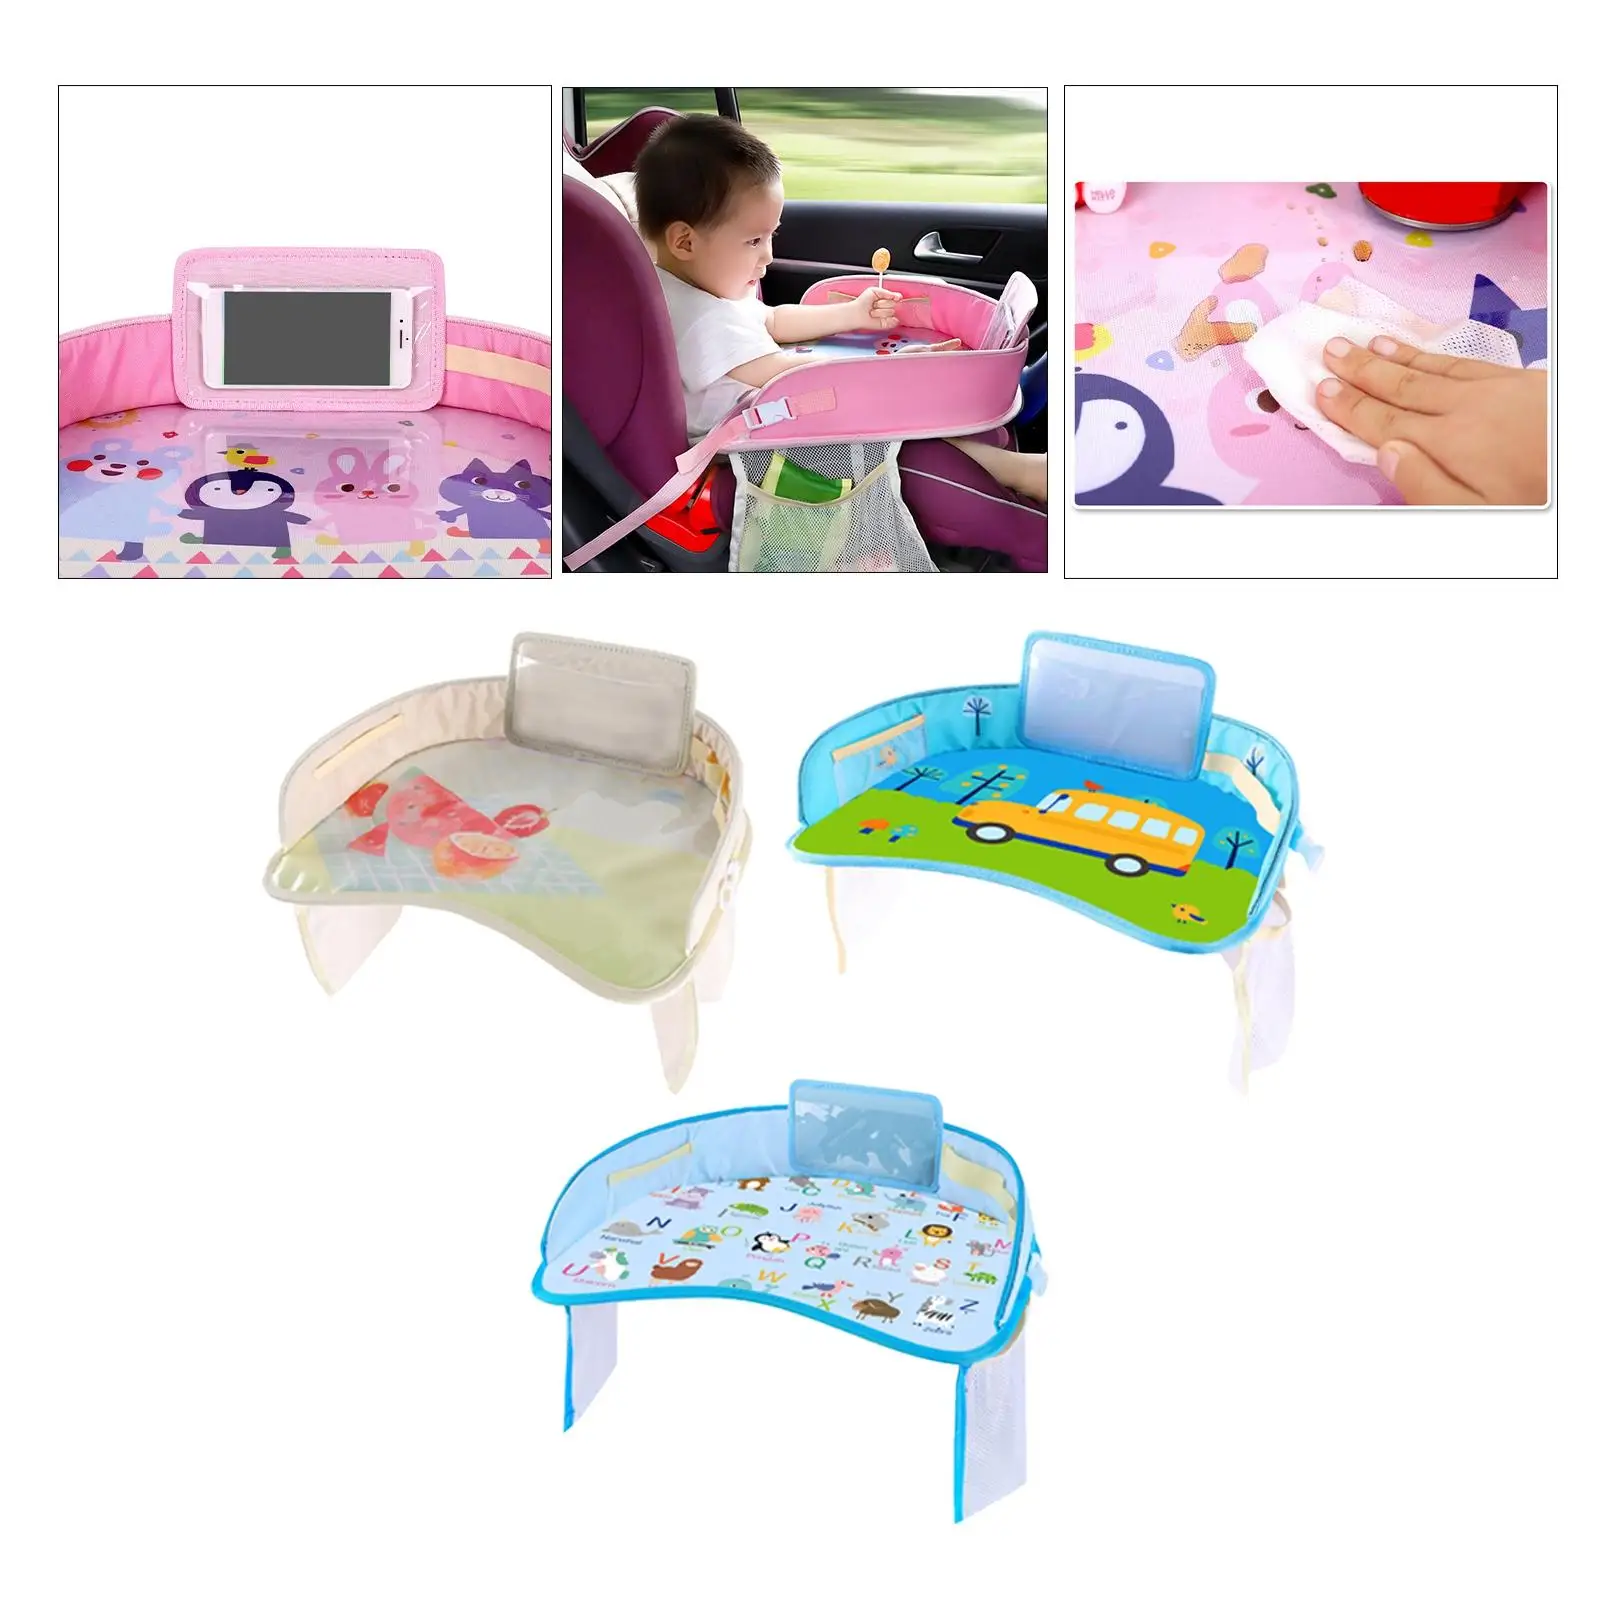  Tray,  Organizer Toddler Tray,  Car Lap Desk Table with Tablet Holder, Storage Pocket,  Eating Tray